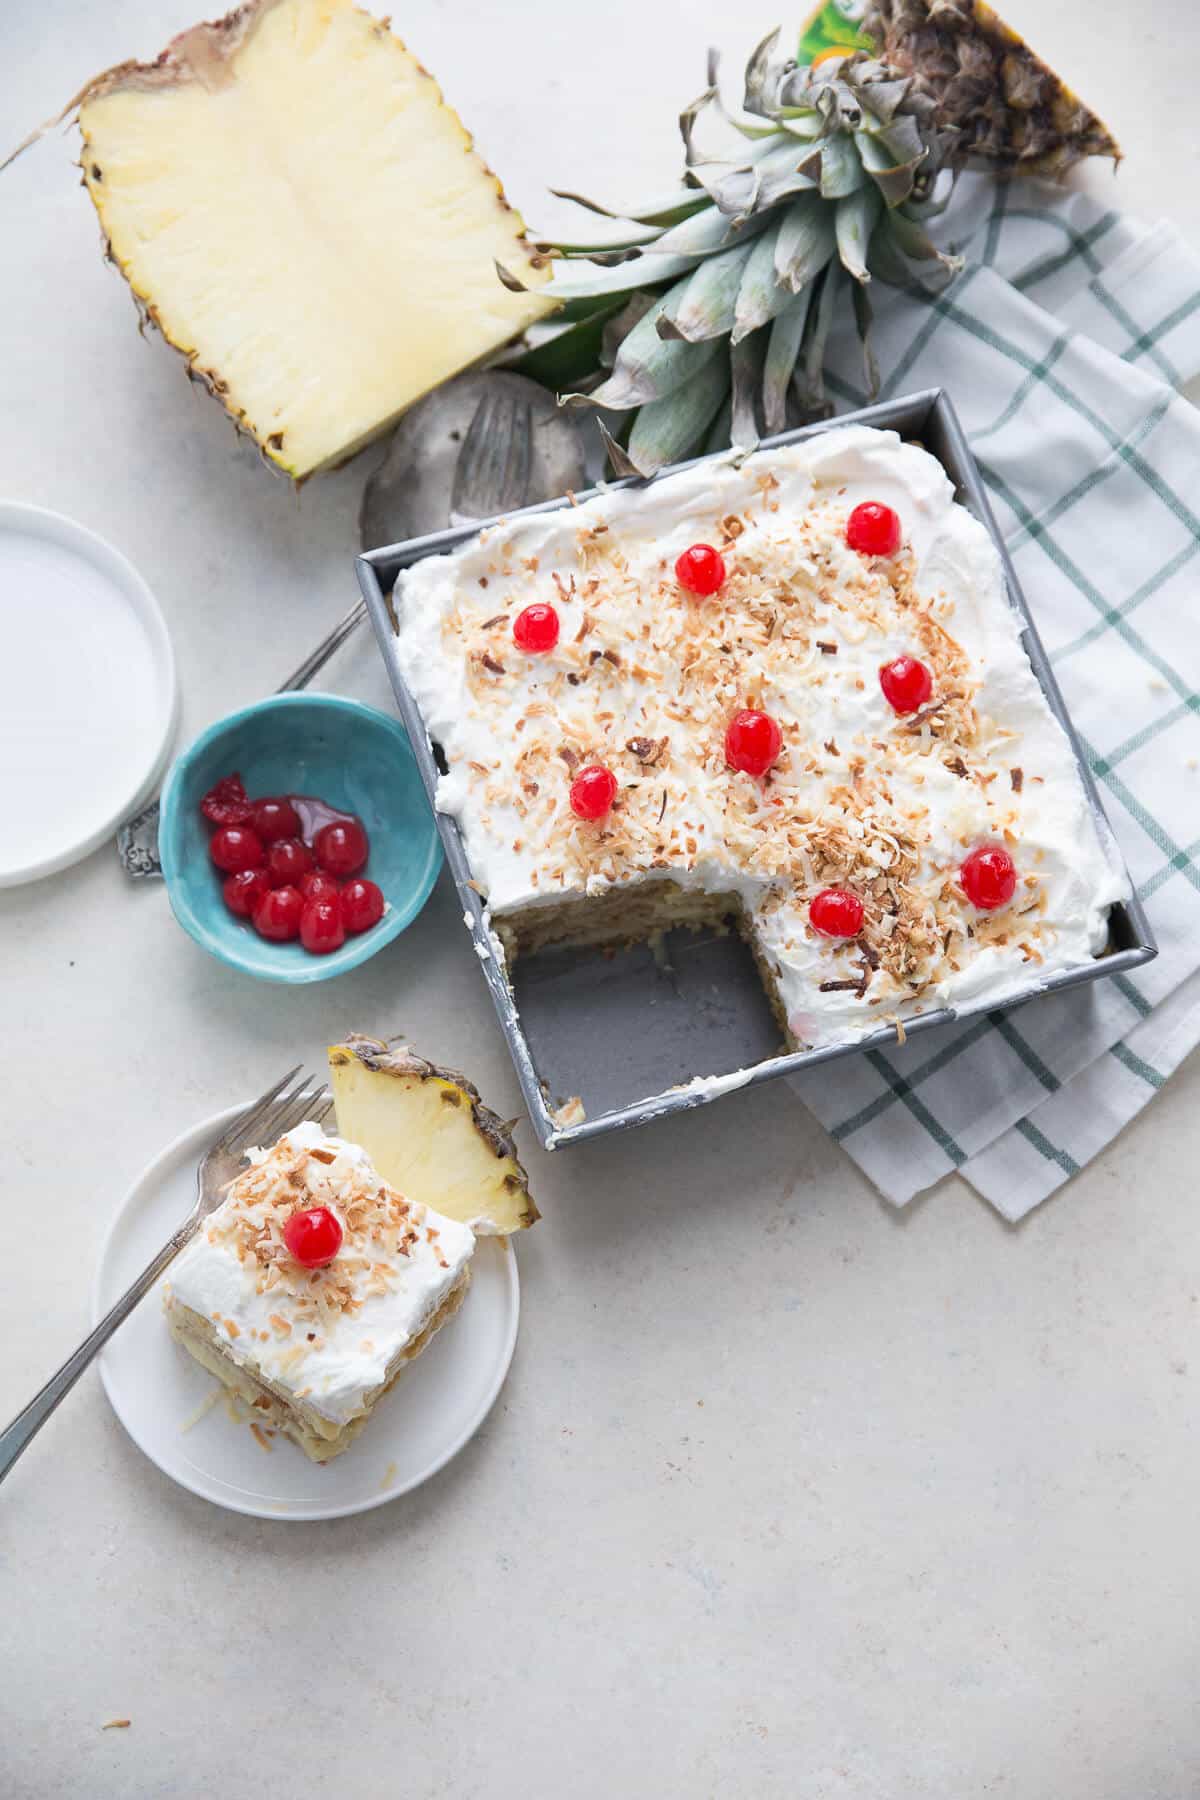 Love pina coladas? Then you will love the sweet pineapple filling and the coconut whipped cream in this easy no bake box cake